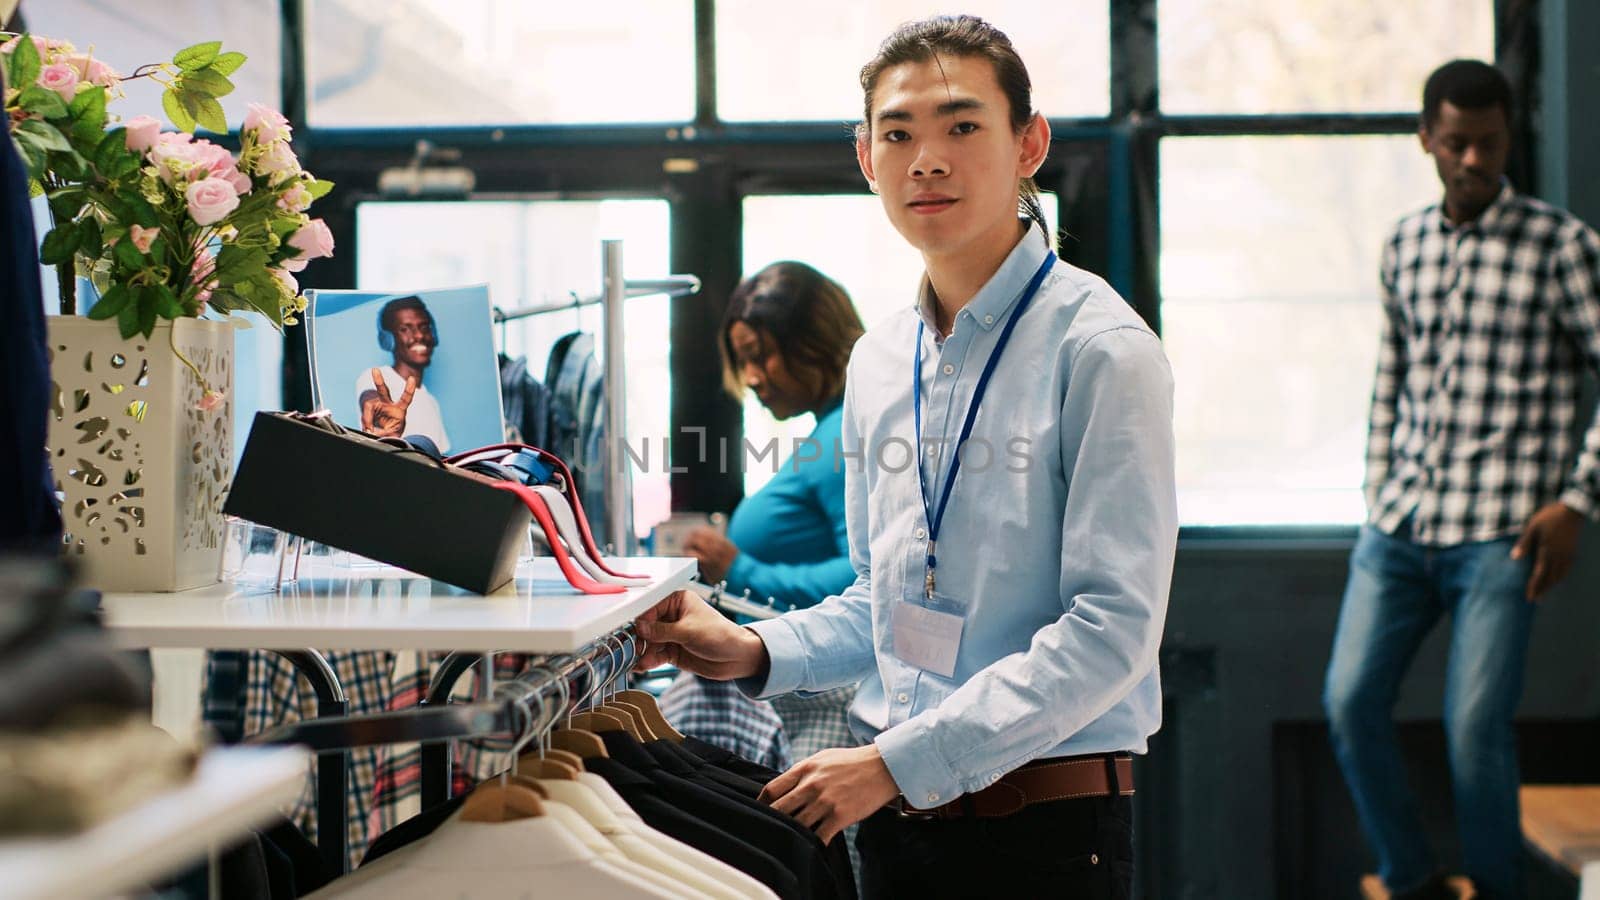 Asian worker arranging new fashion collection, putting hangers with fashionable merchandise on racks in modern boutique. Employee preparing store for opening, working with stylish clothes